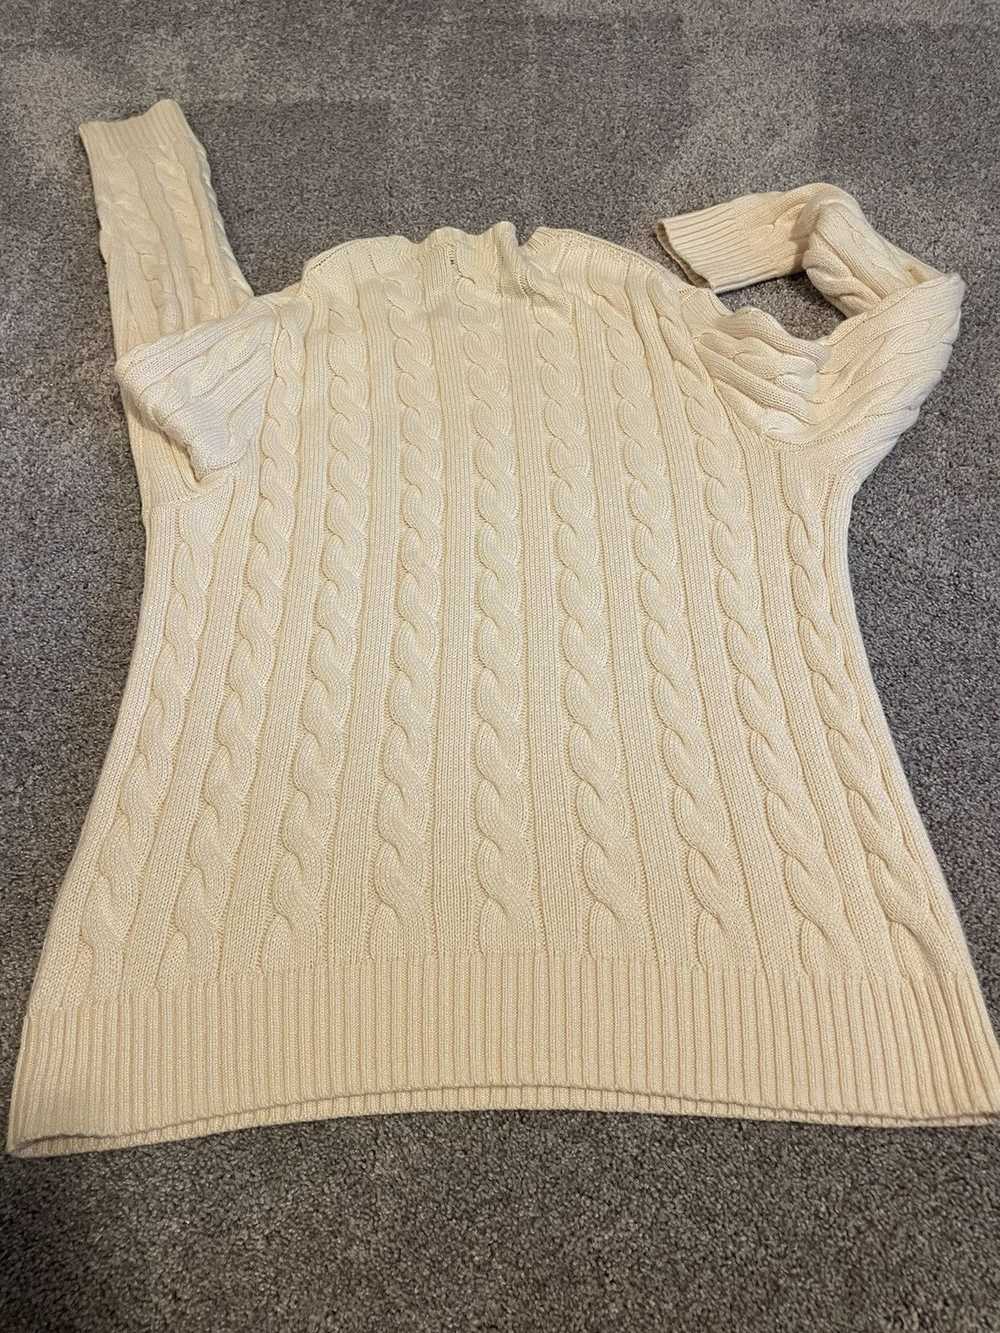 Polo Ralph Lauren Cable Knit Sweater Size M - image 8